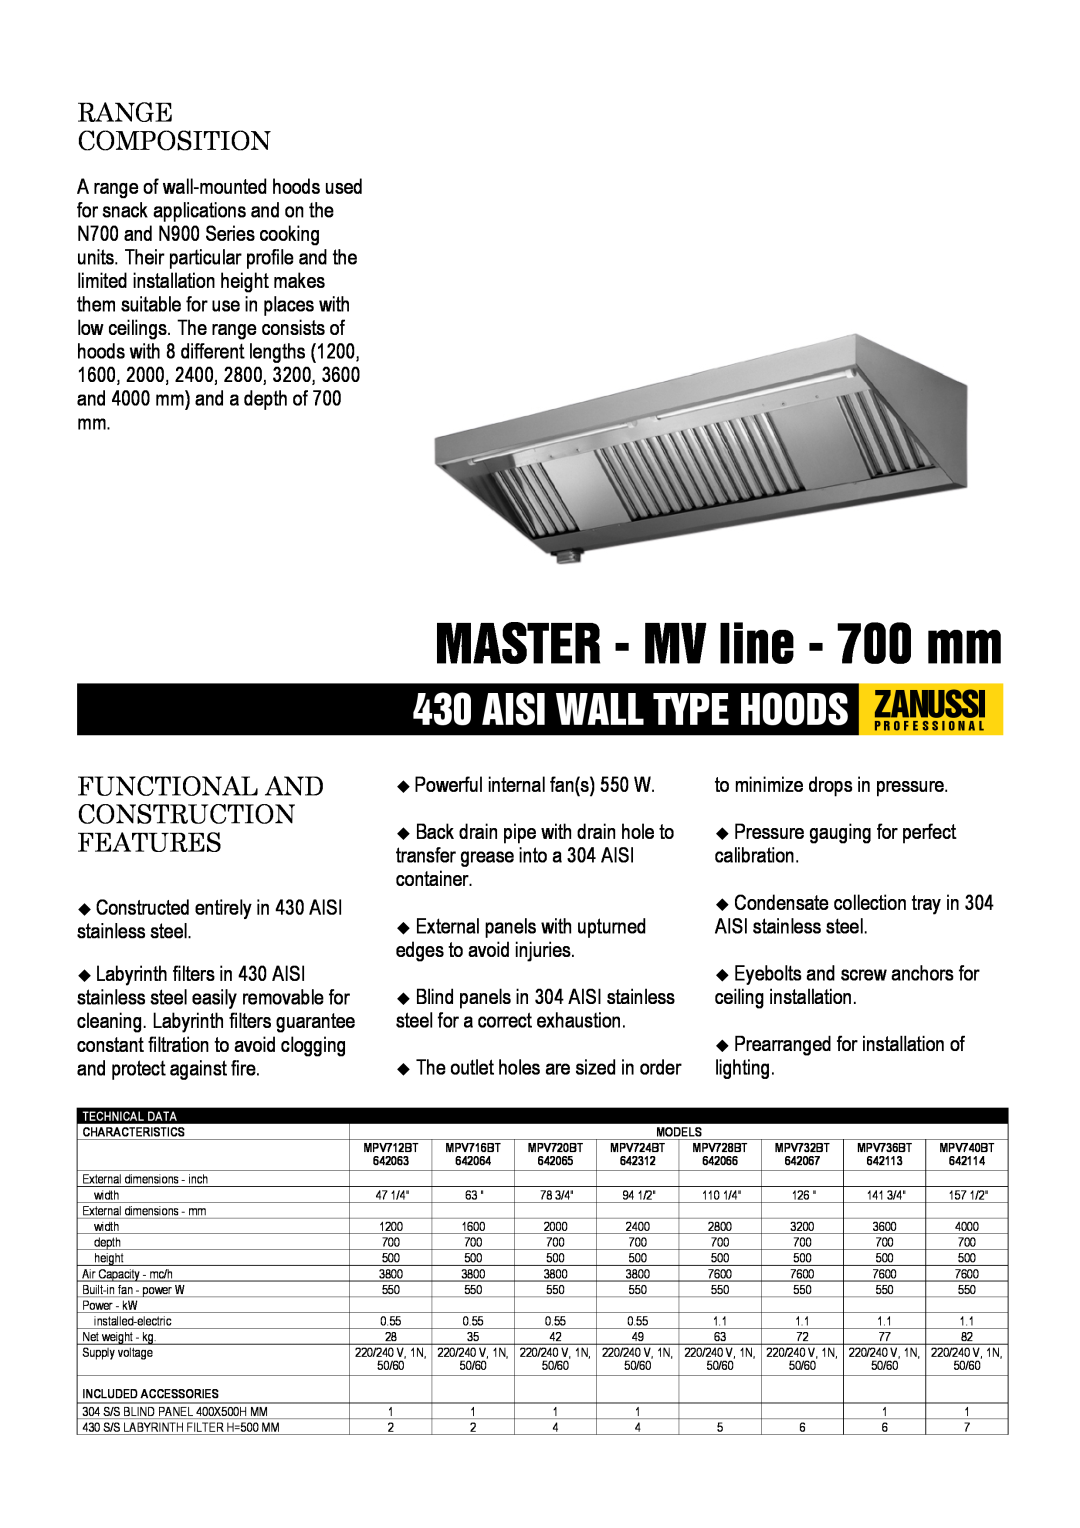 Zanussi 642114, 642312 dimensions MASTER - MV line - 700 mm, Range Composition, Functional And Construction Features 